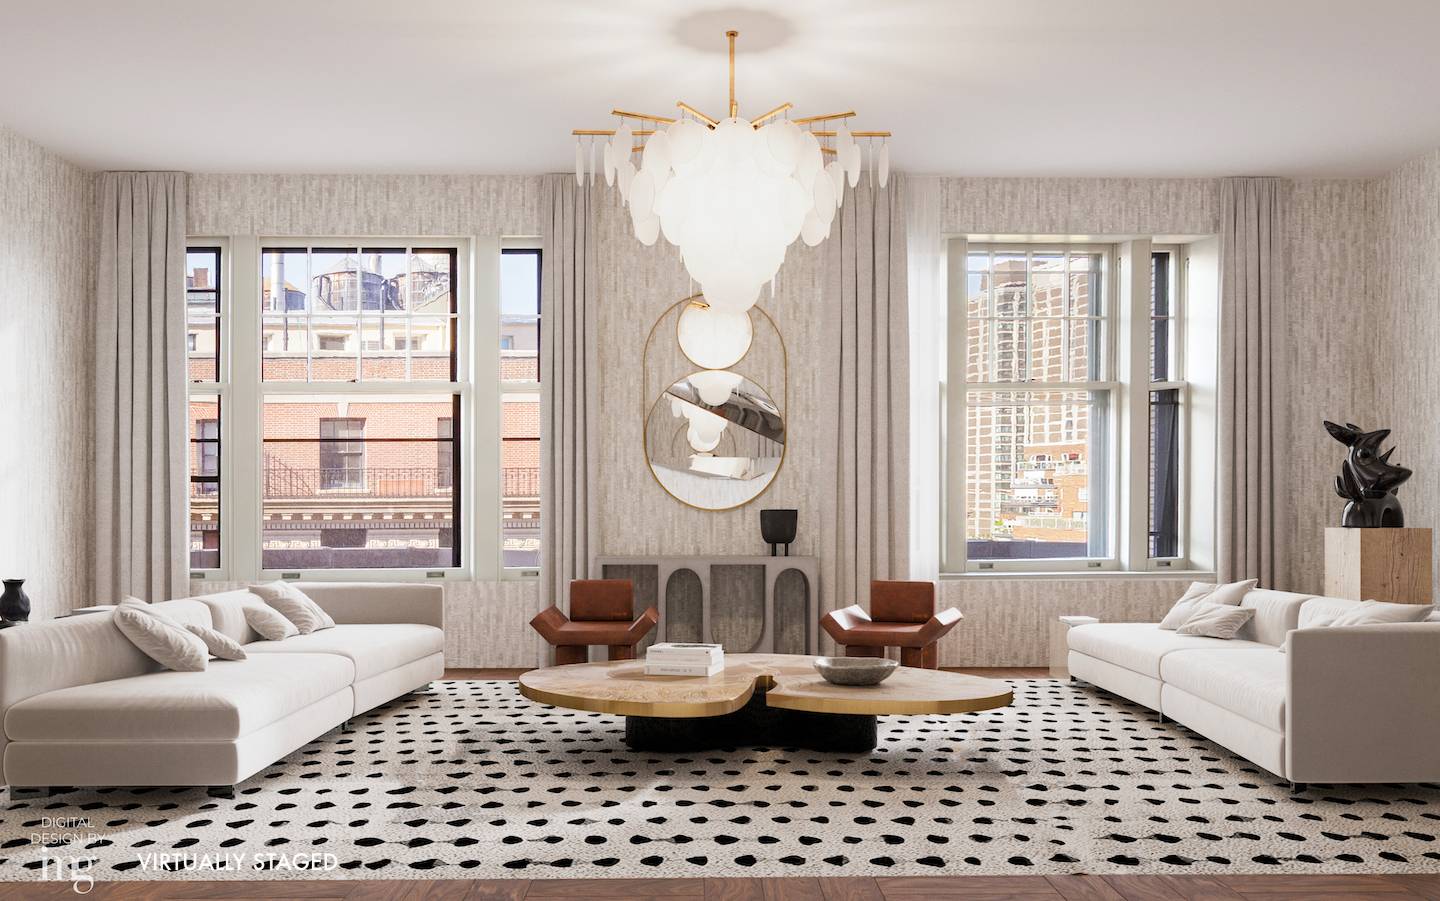 One-of-a-Kind Top Floor 5 Bedroom, Grand Residence at 555 Park Avenue